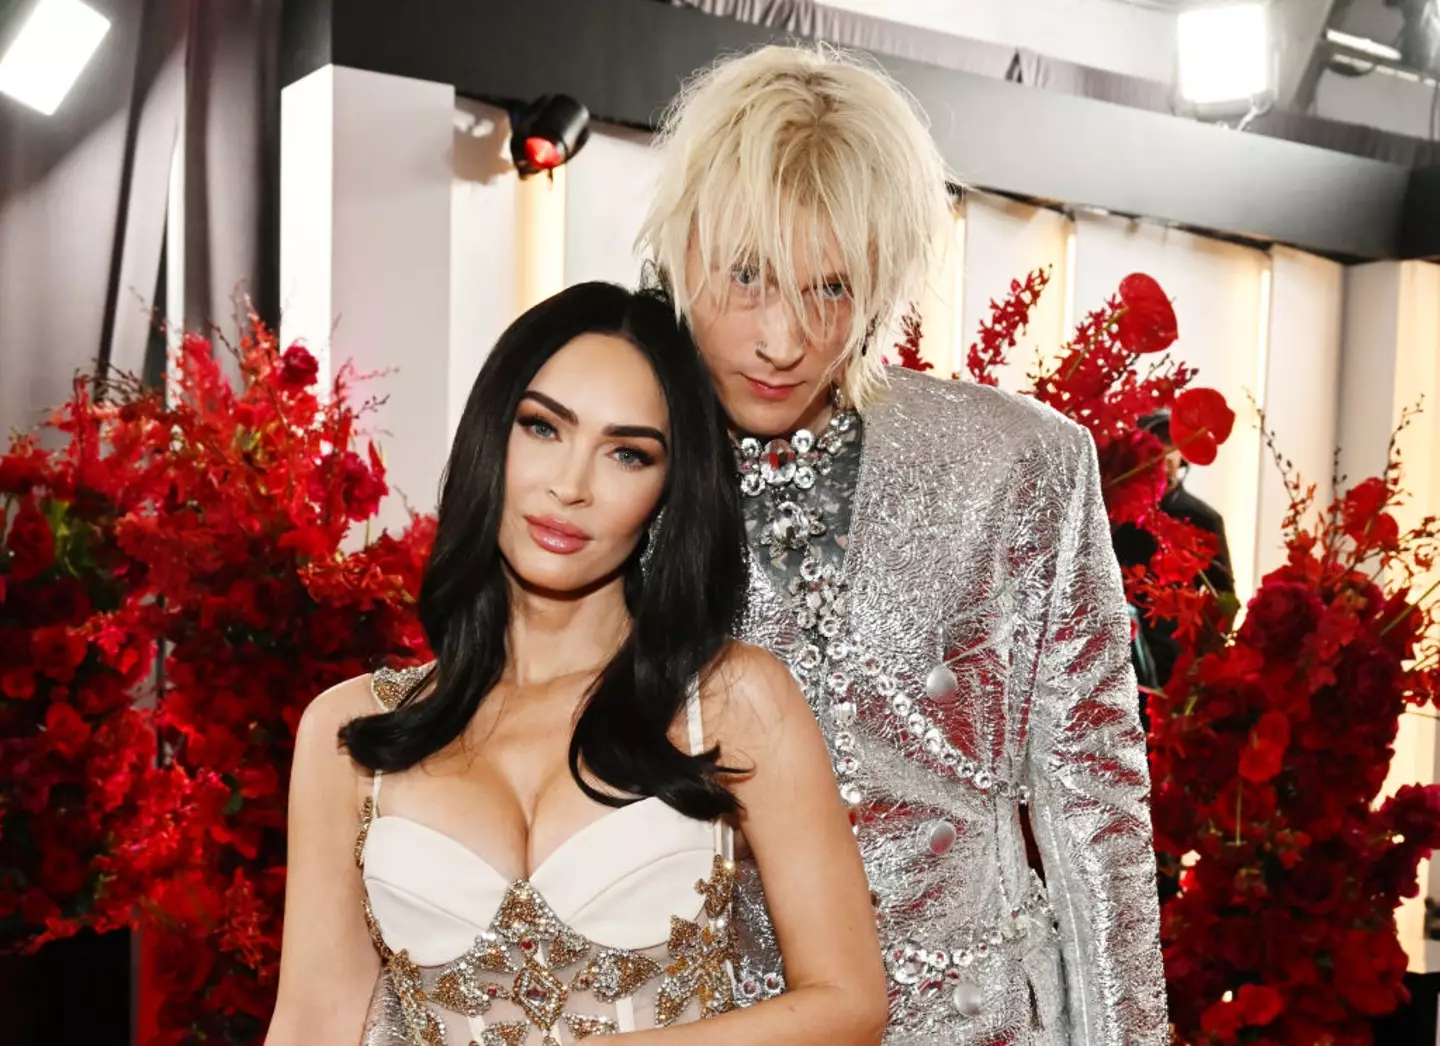 Megan Fox and Machine Gun Kelly have frequently raised eyebrows with their very public romance.